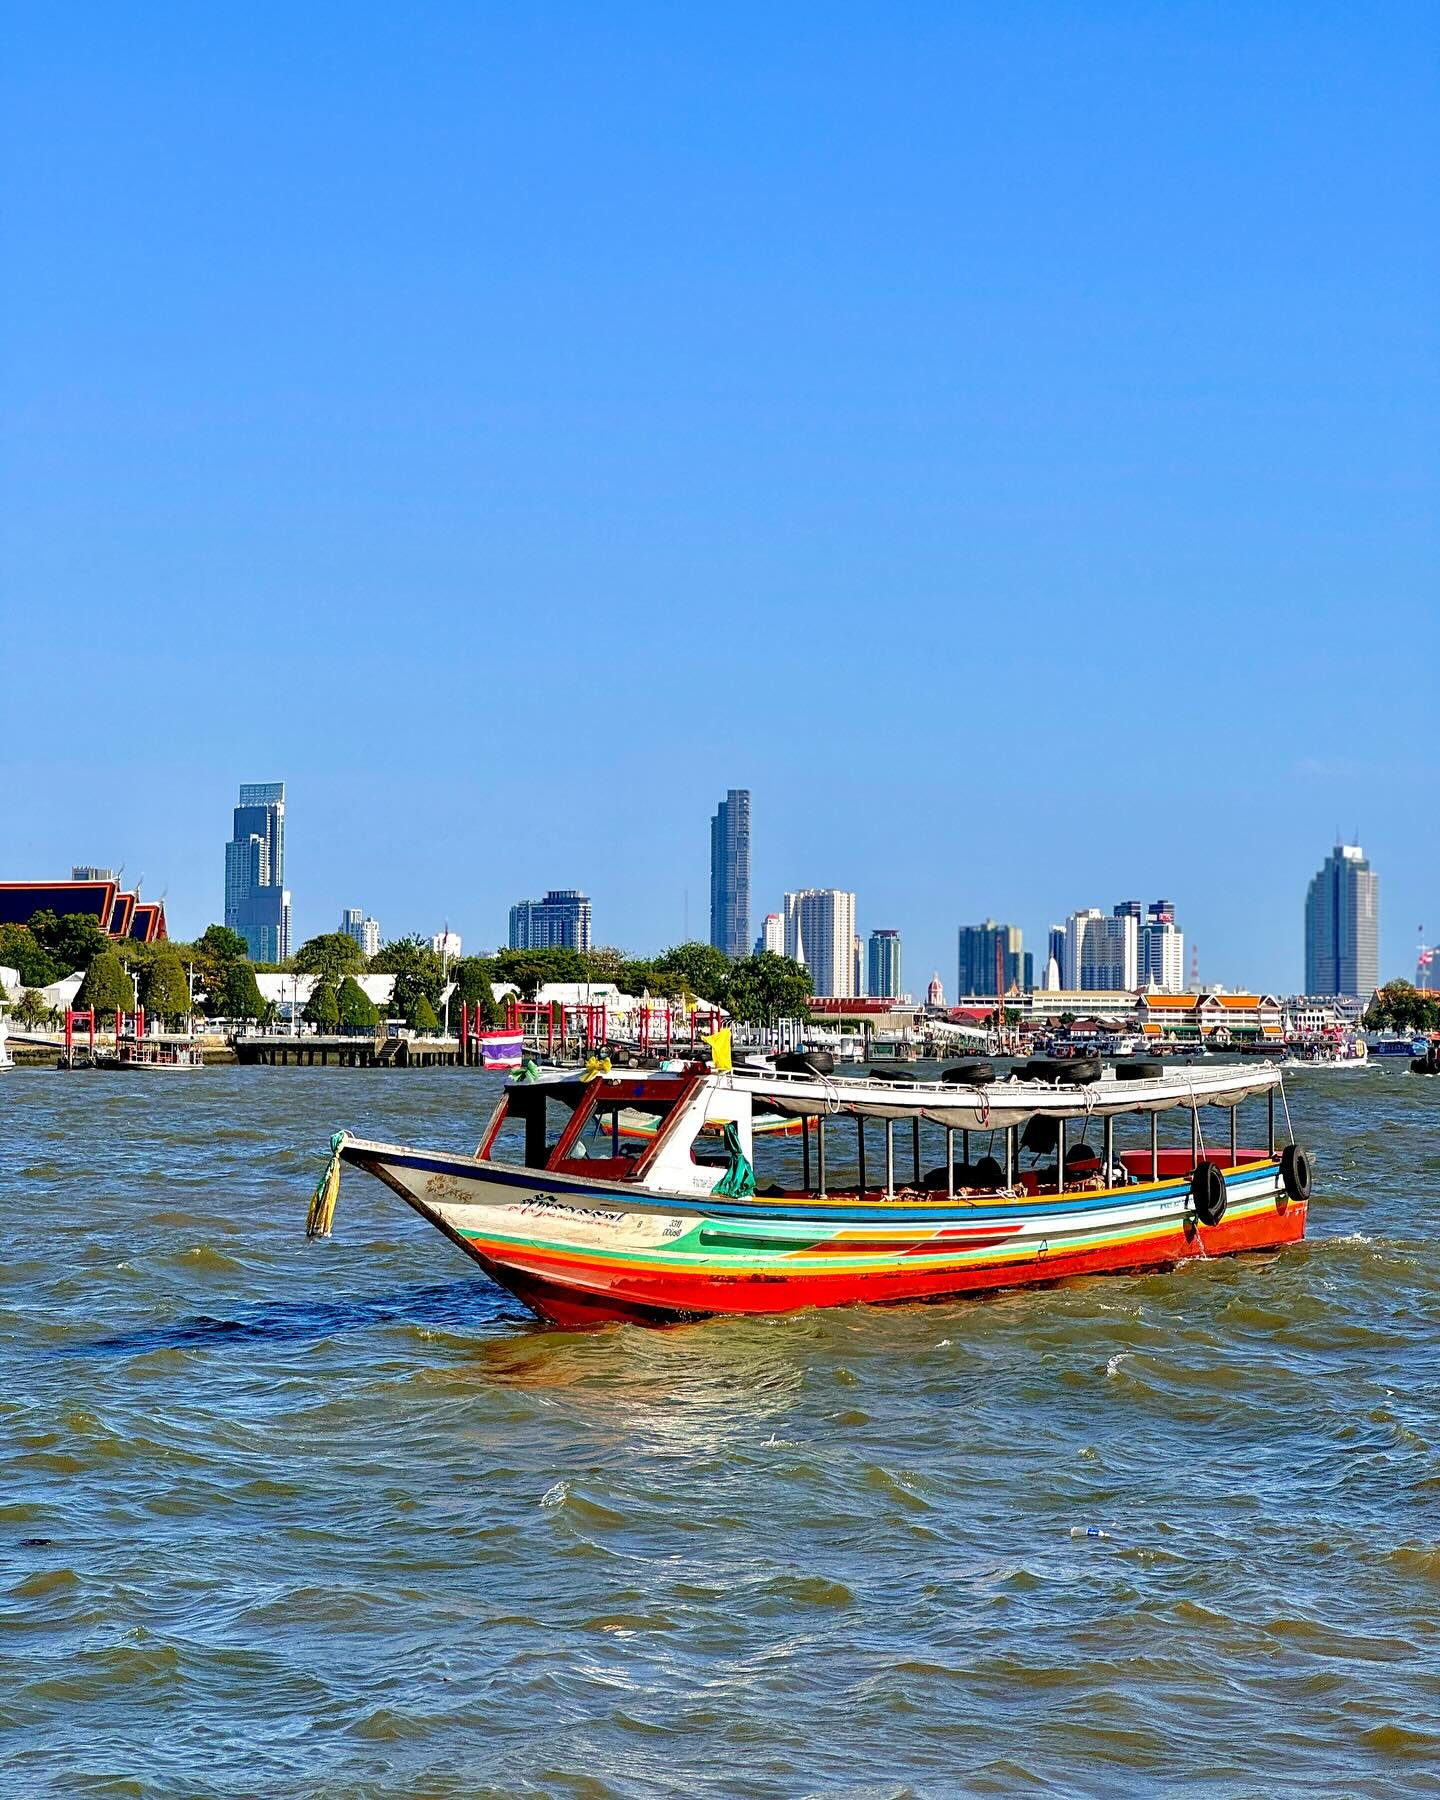 📌Chao Phraya River - Bangkok Thailand

✏️Chao Phraya River means &lsquo;The King of the River&rsquo; The Chao Phraya watershed is the largest in Thailand, covering approximately 35 percent of the nation&rsquo;s land. Stretching approximately 372 kil